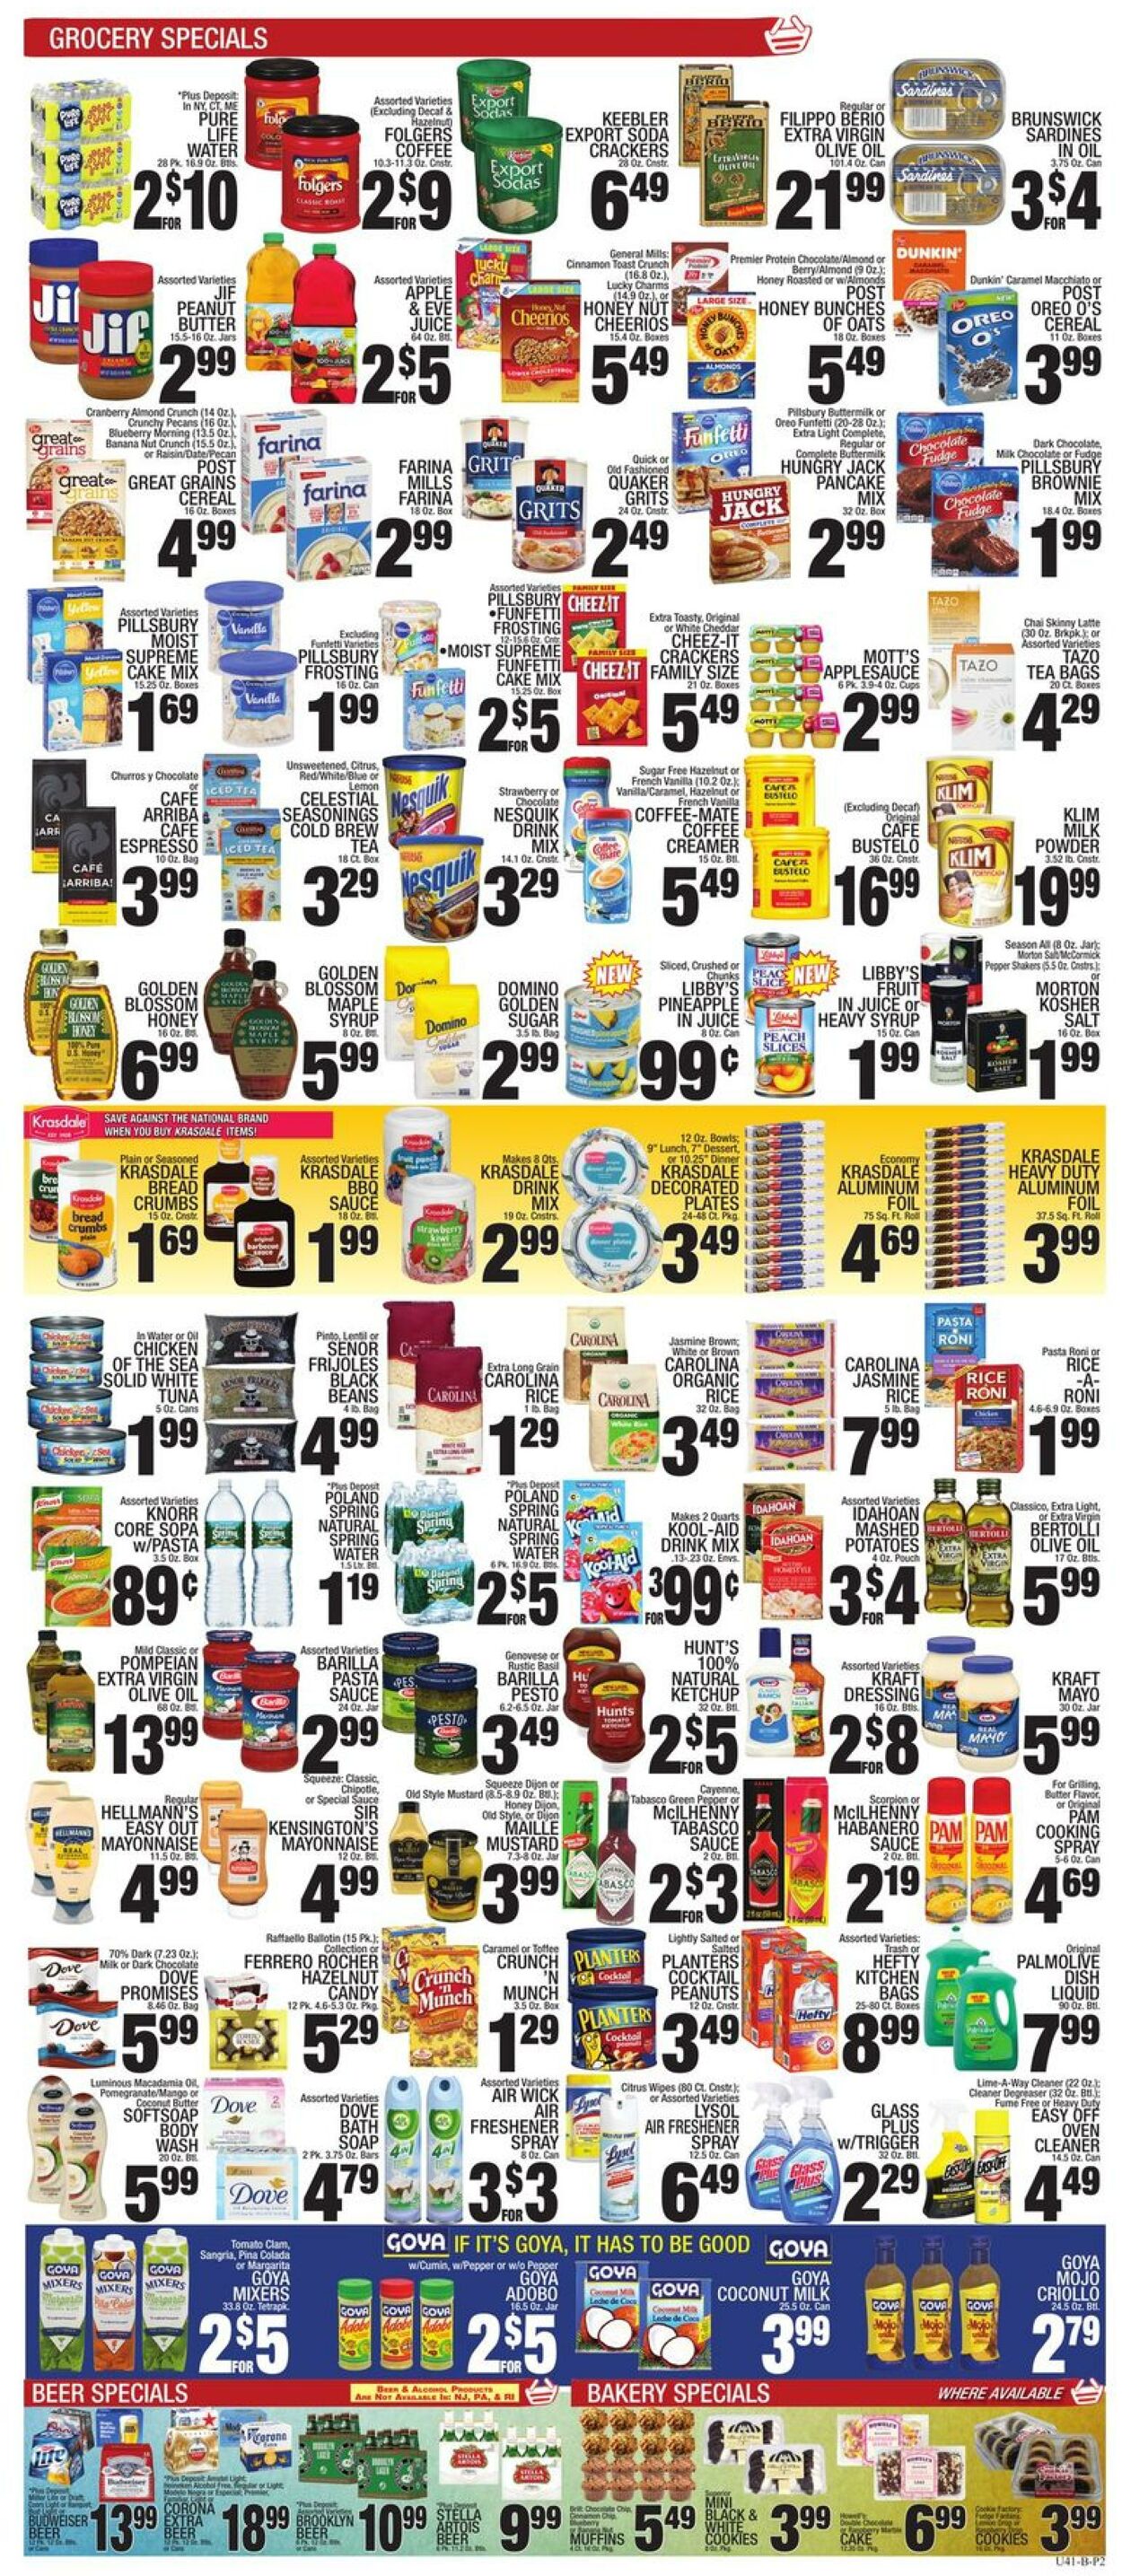 Weekly ad CTown 05/13/2022 - 05/19/2022